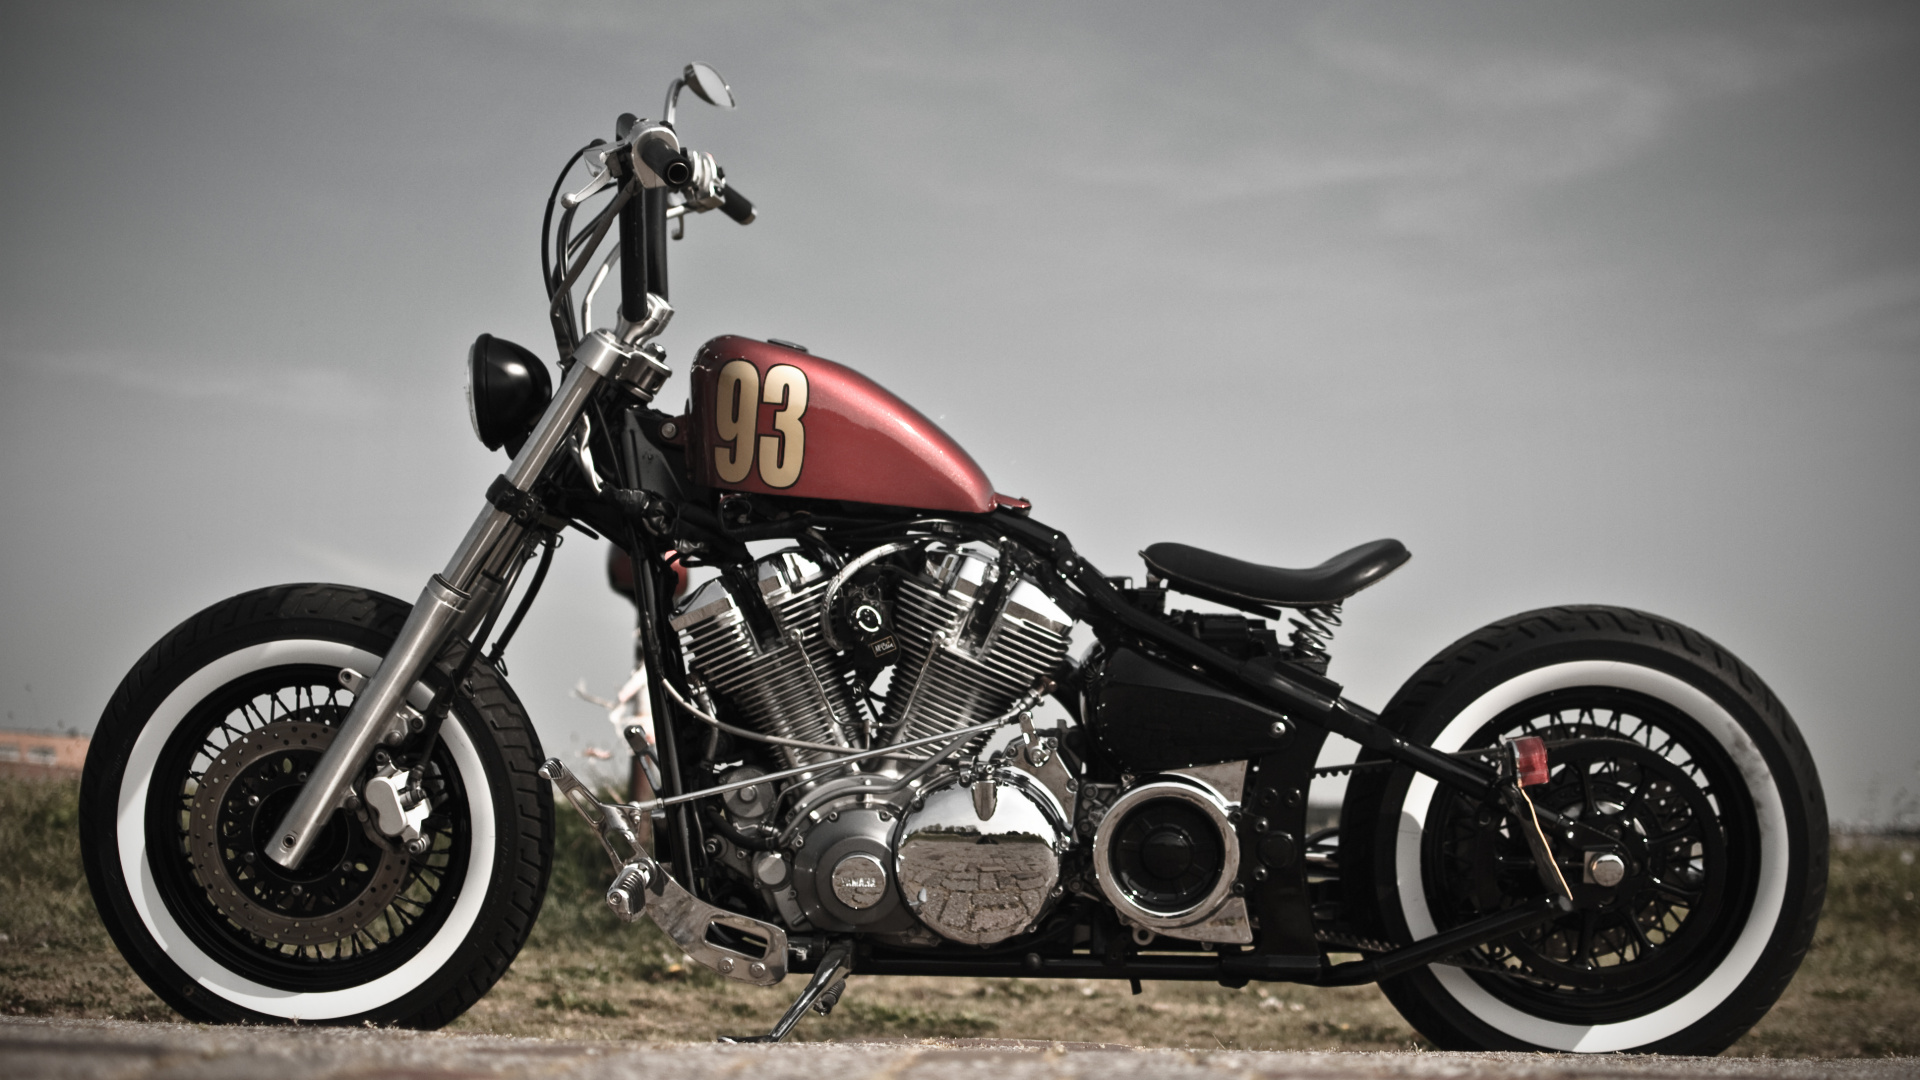 Red and Black Motorcycle on Brown Field. Wallpaper in 1920x1080 Resolution